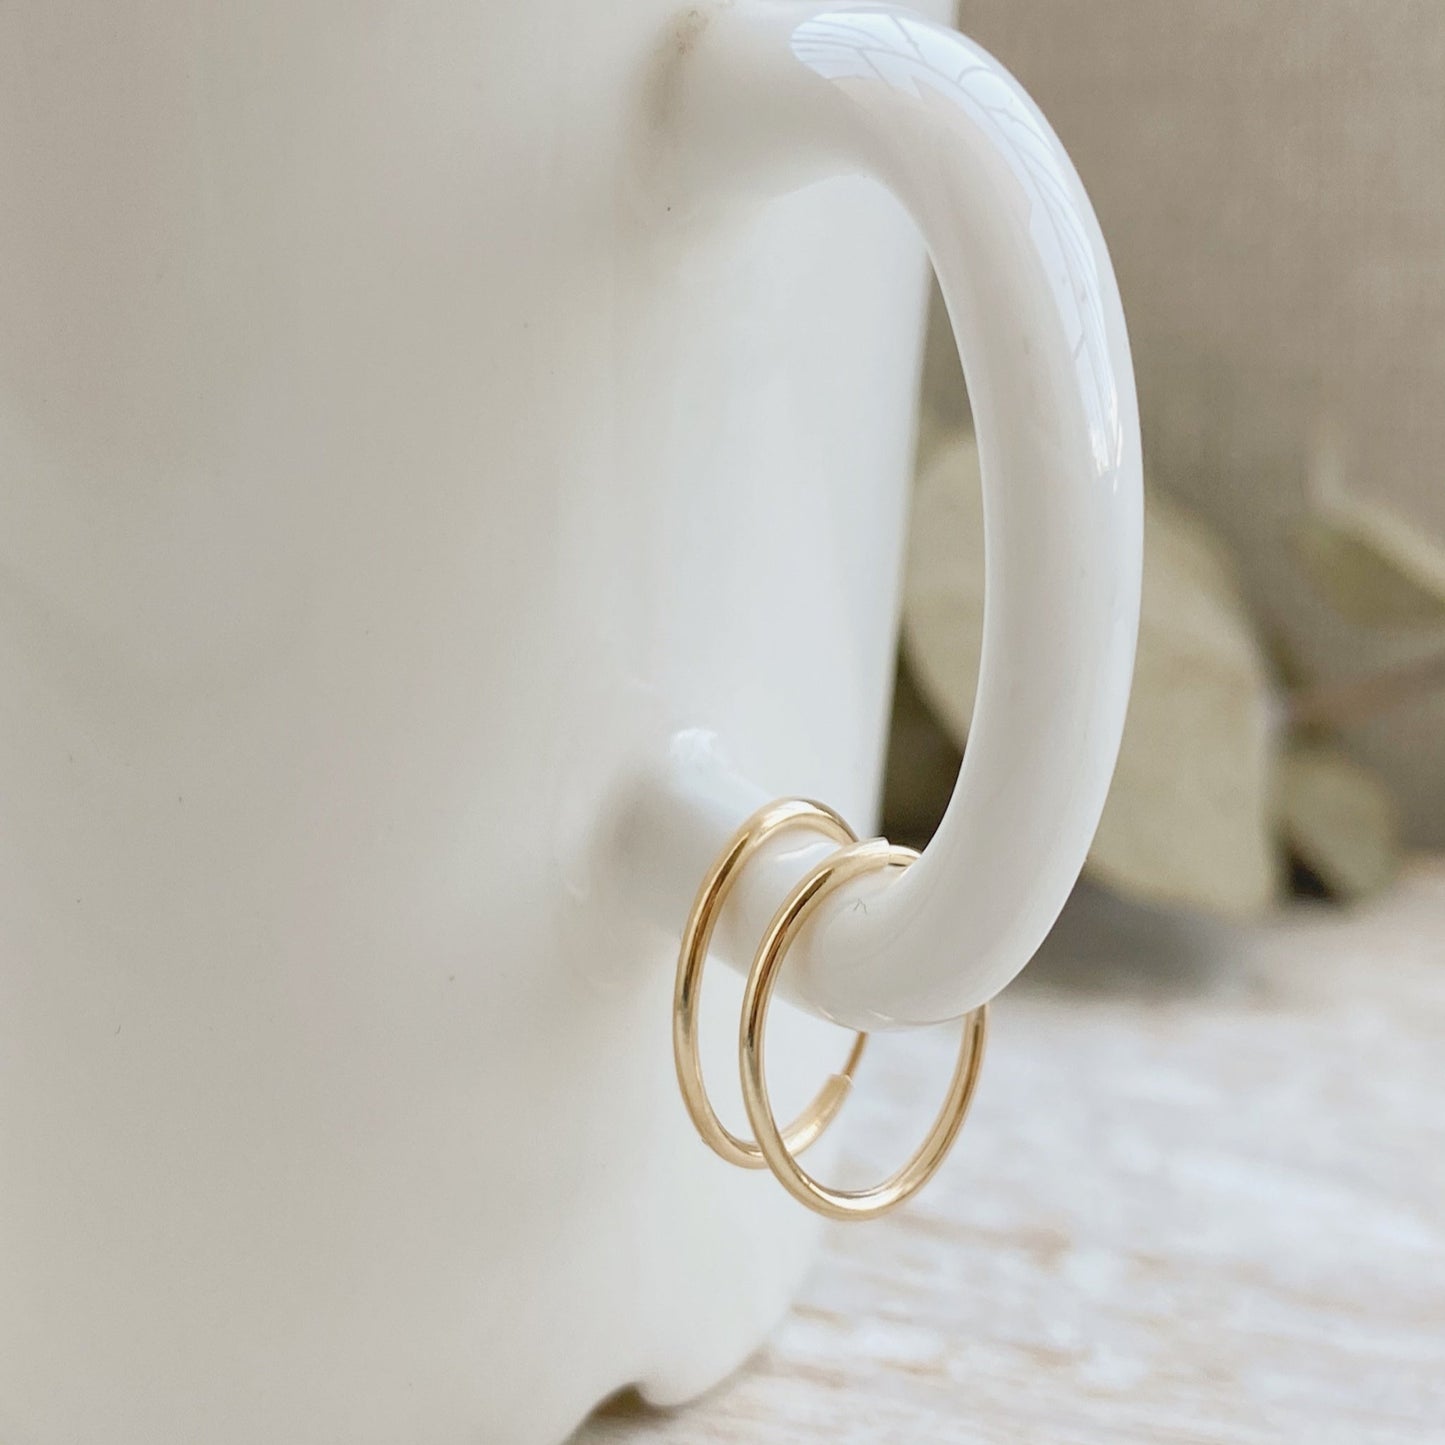 These 14k gold hoop earrings are the perfect gift for yourself or a friend. The lightweight design makes these hoops comfortable to wear all day long, and the simple gold color is sure to complement your aesthetic.